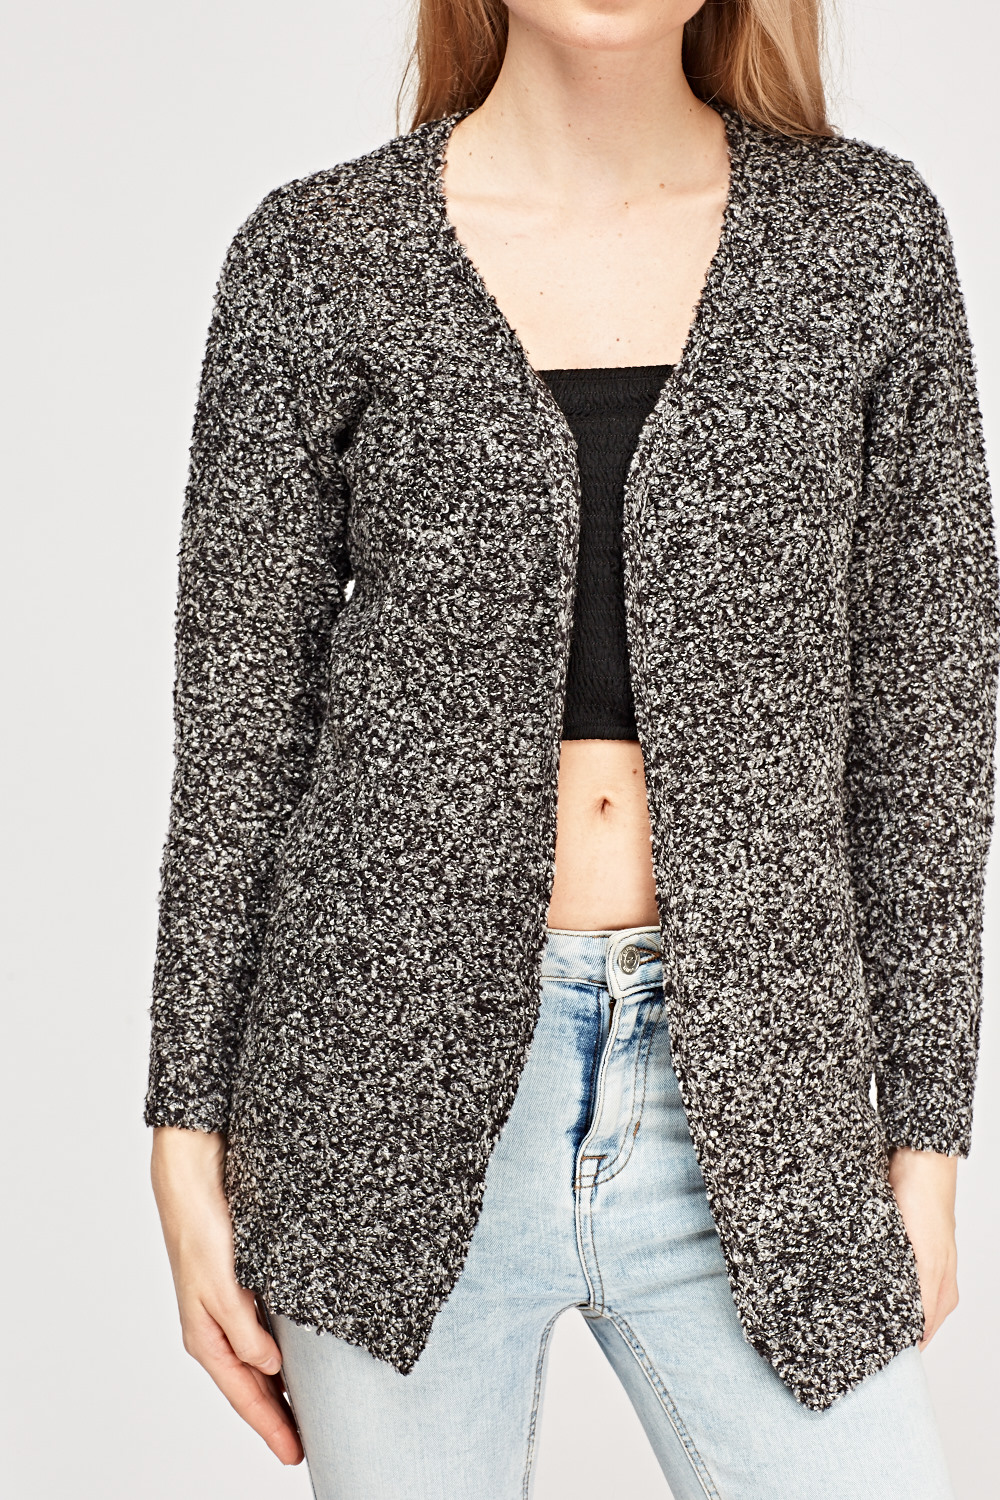 Bobble Knit Speckled Cardigan - Just $6